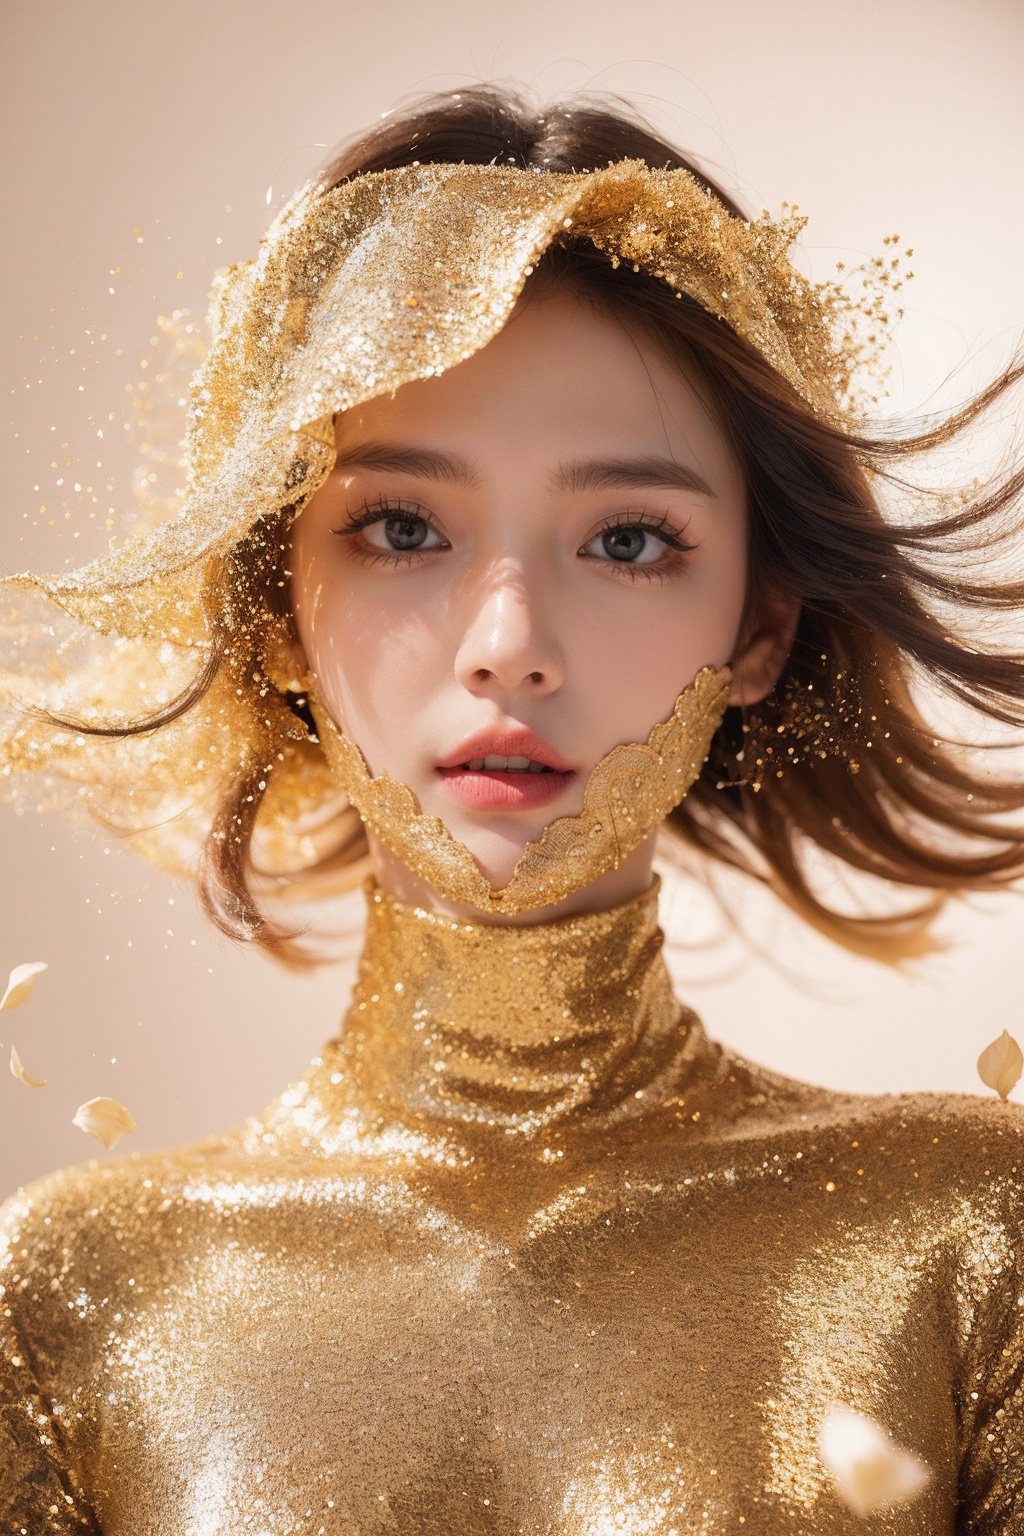 (1girl:1.1),stars in the eyes,(pure girl:1.1),(full body:0.6),There are many scattered luminous petals,contour deepening,white_background,cinematic angle,gold powder,<lora:jin_20231226224140-000003:0.7>, 